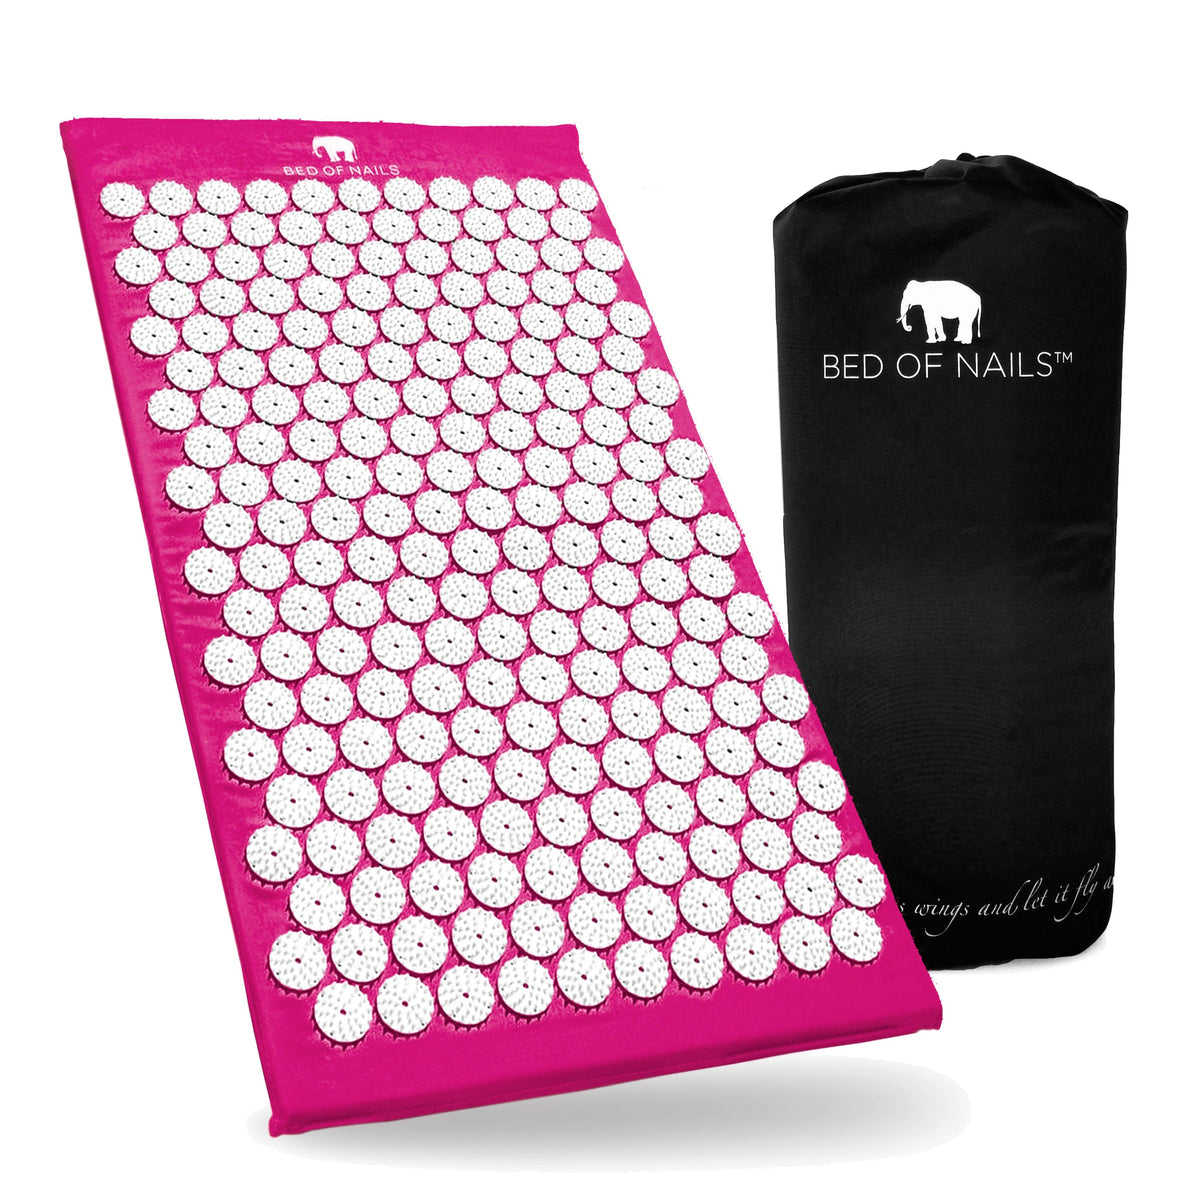 Buy Vive Acupressure Mat - Bed of Nails Massage Pillow Pad - Full Body  Massager Cushion for Back, Legs, Neck, Sciatica, Trigger Point Therapy,  Stress and Pain - Memory Foam for Chair,